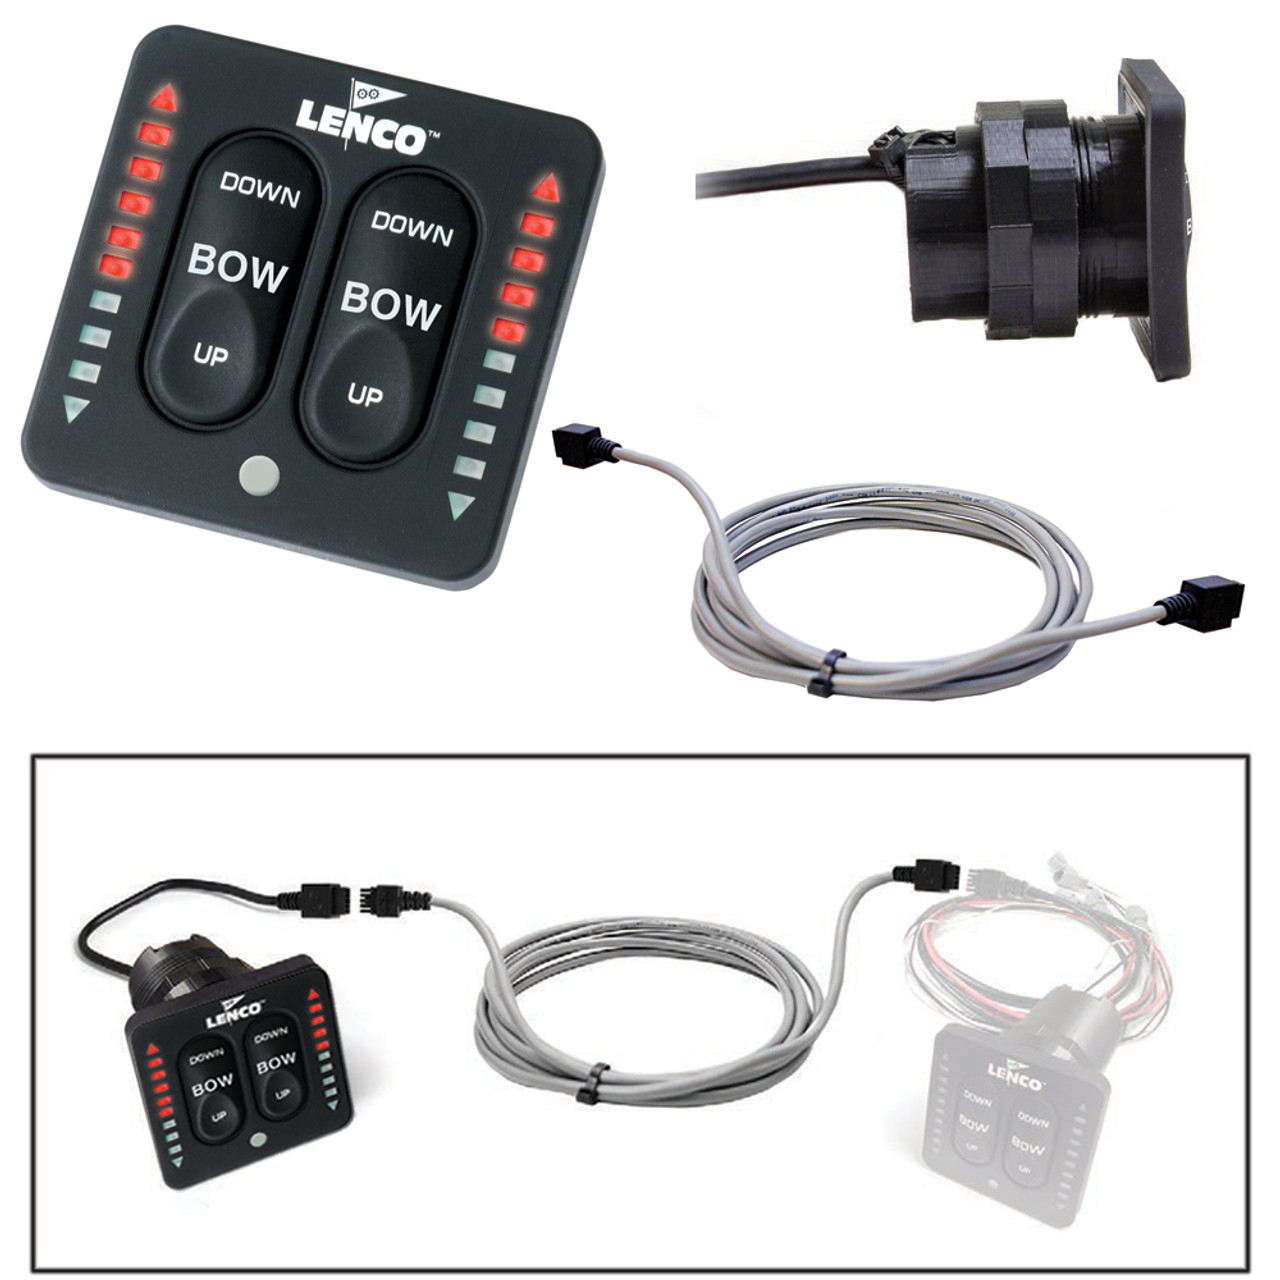 Lenco Flybridge Kit f\/ LED Indicator Key Pad f\/All-In-One Integrated Tactile Switch - 40' [11841-004]